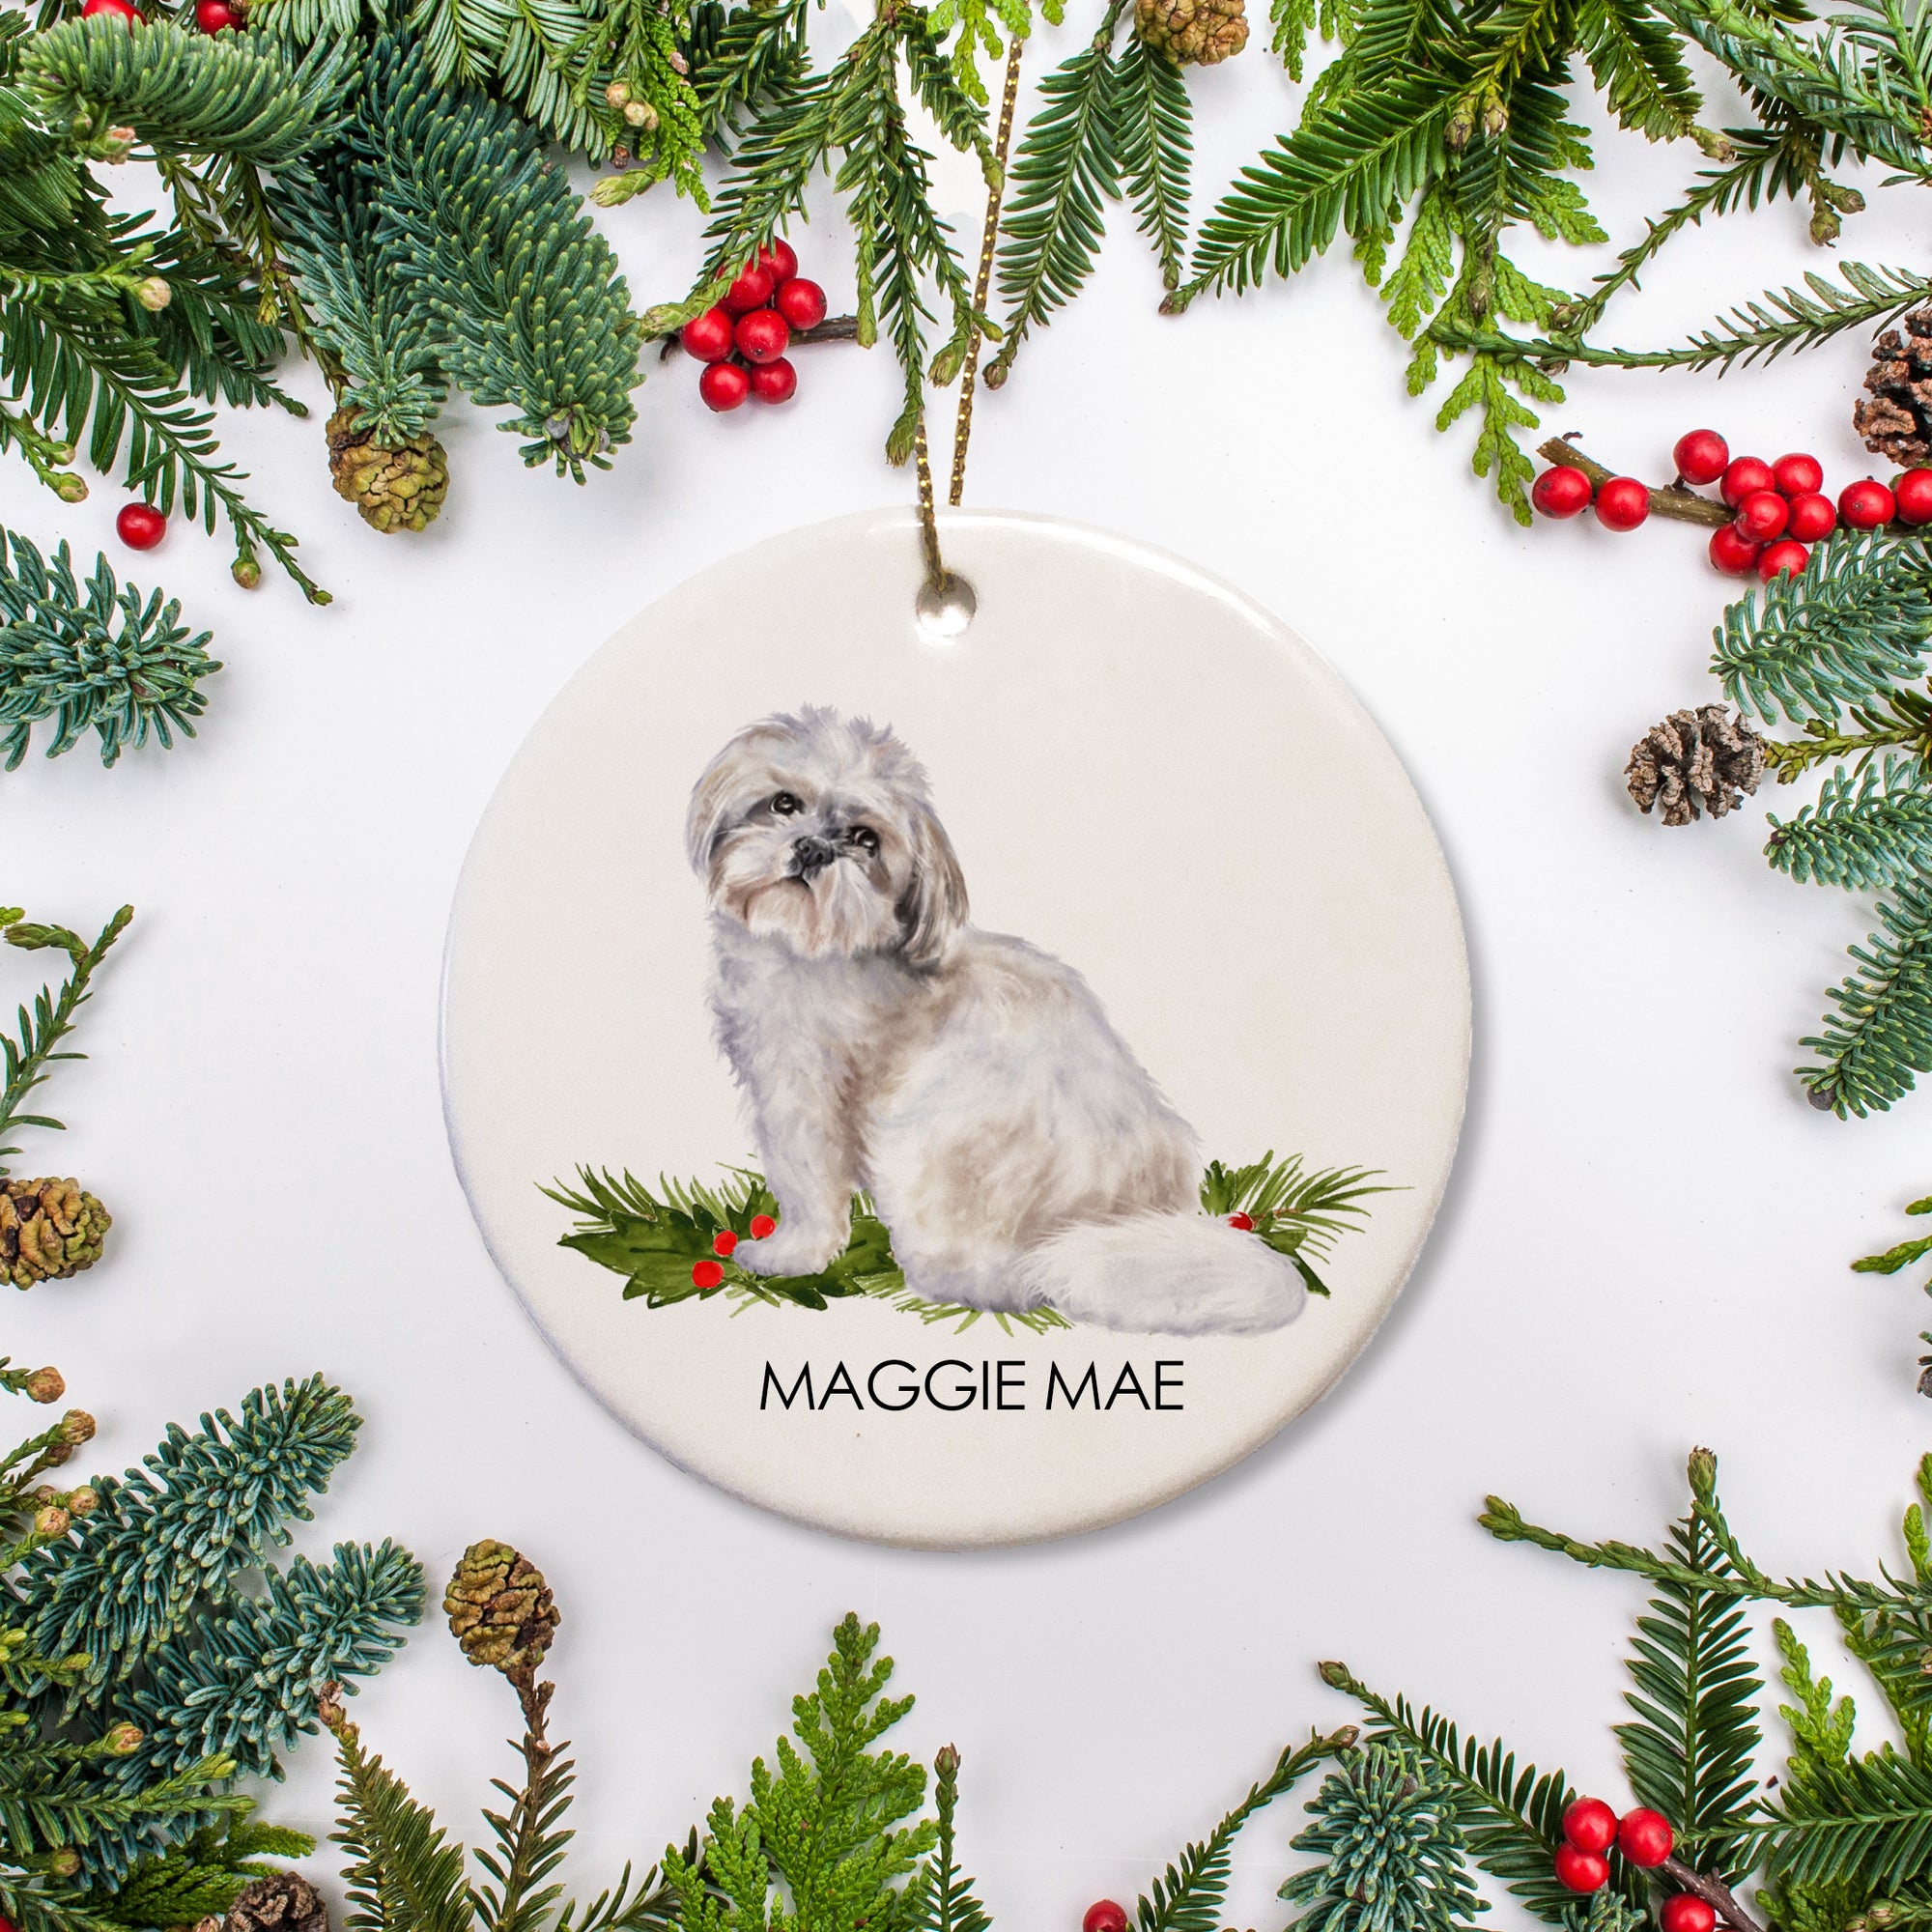 Celebrate the holidays with this personalized Shih Tzu ceramic Christmas ornament. Perfect for dog lovers, the ornament is custom designed to make a festive addition to any Christmas tree. Featuring a detailed design, the ceramic ornament is a great way to remember your pet for years to come.